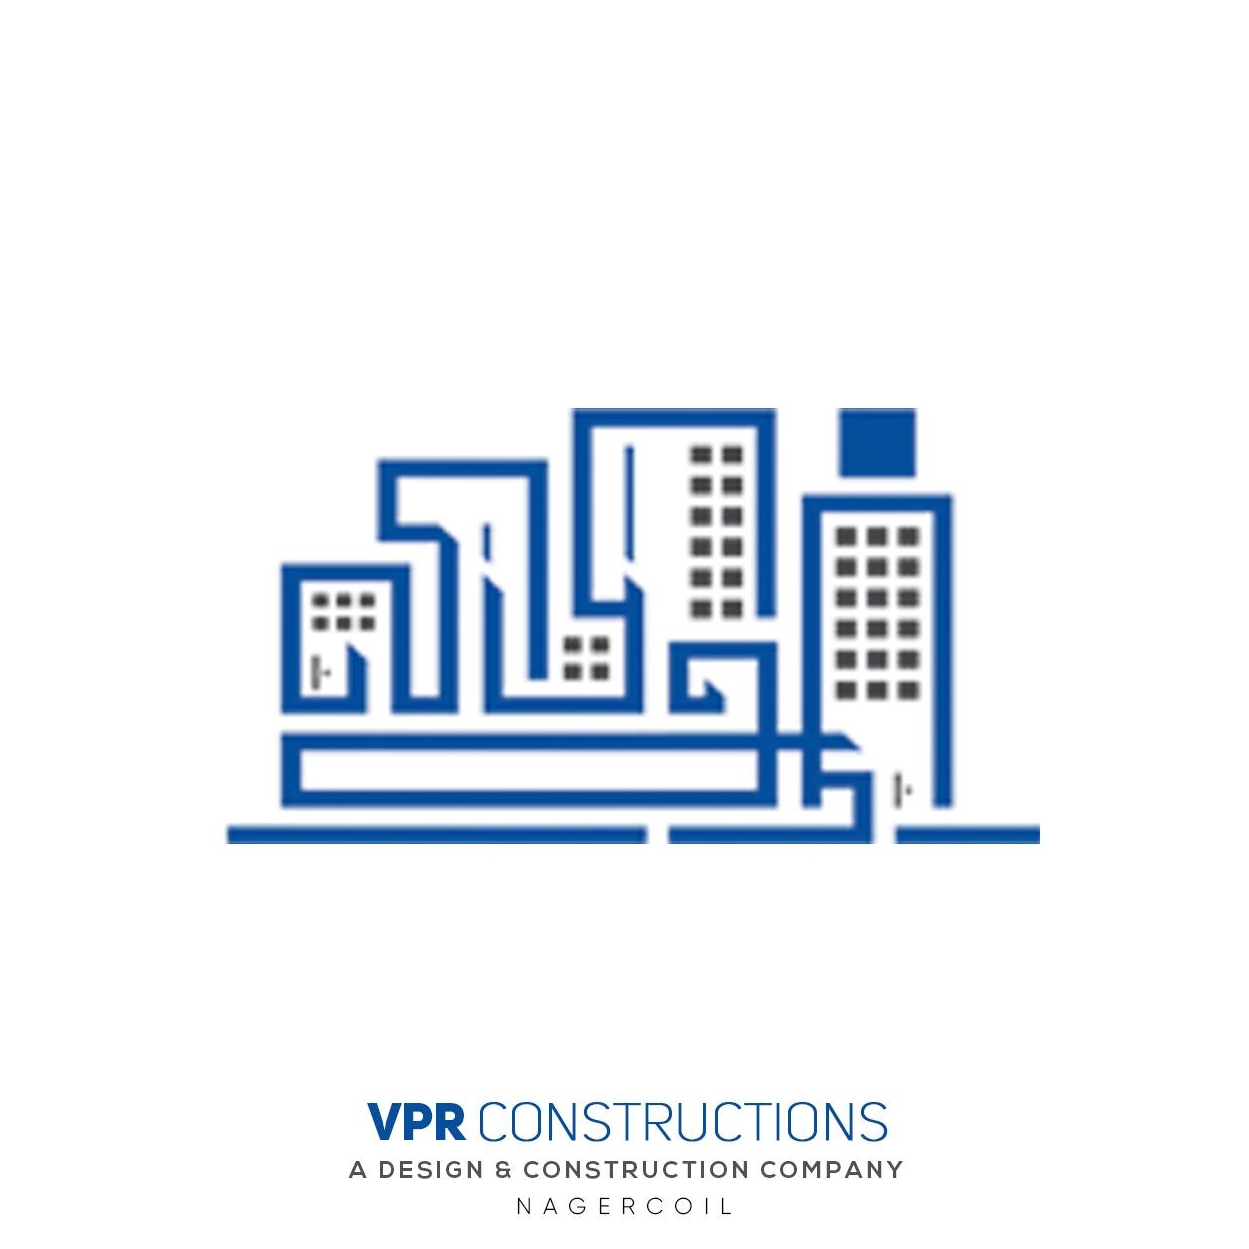 VPR CONSTRUCTIONS|Architect|Professional Services